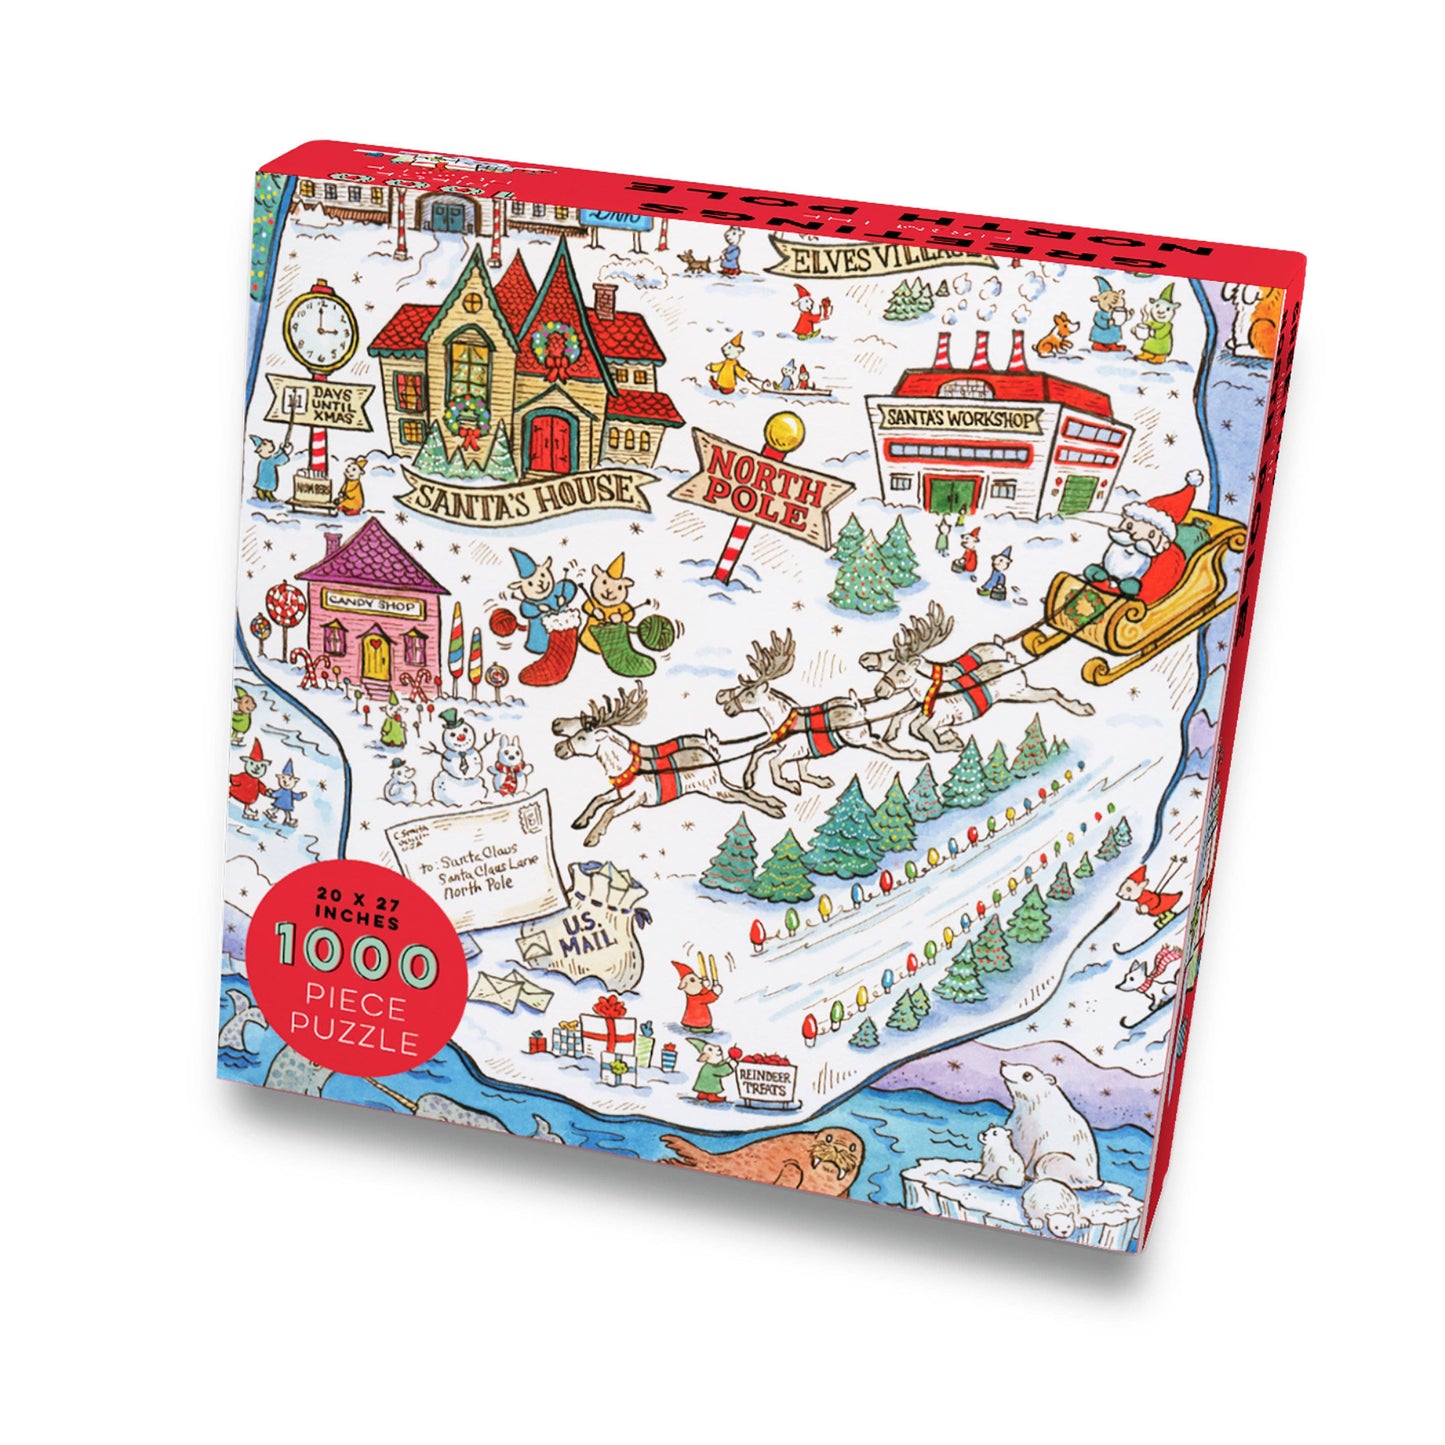 1000 Piece Greetings From The North Pole Christmas Jigsaw